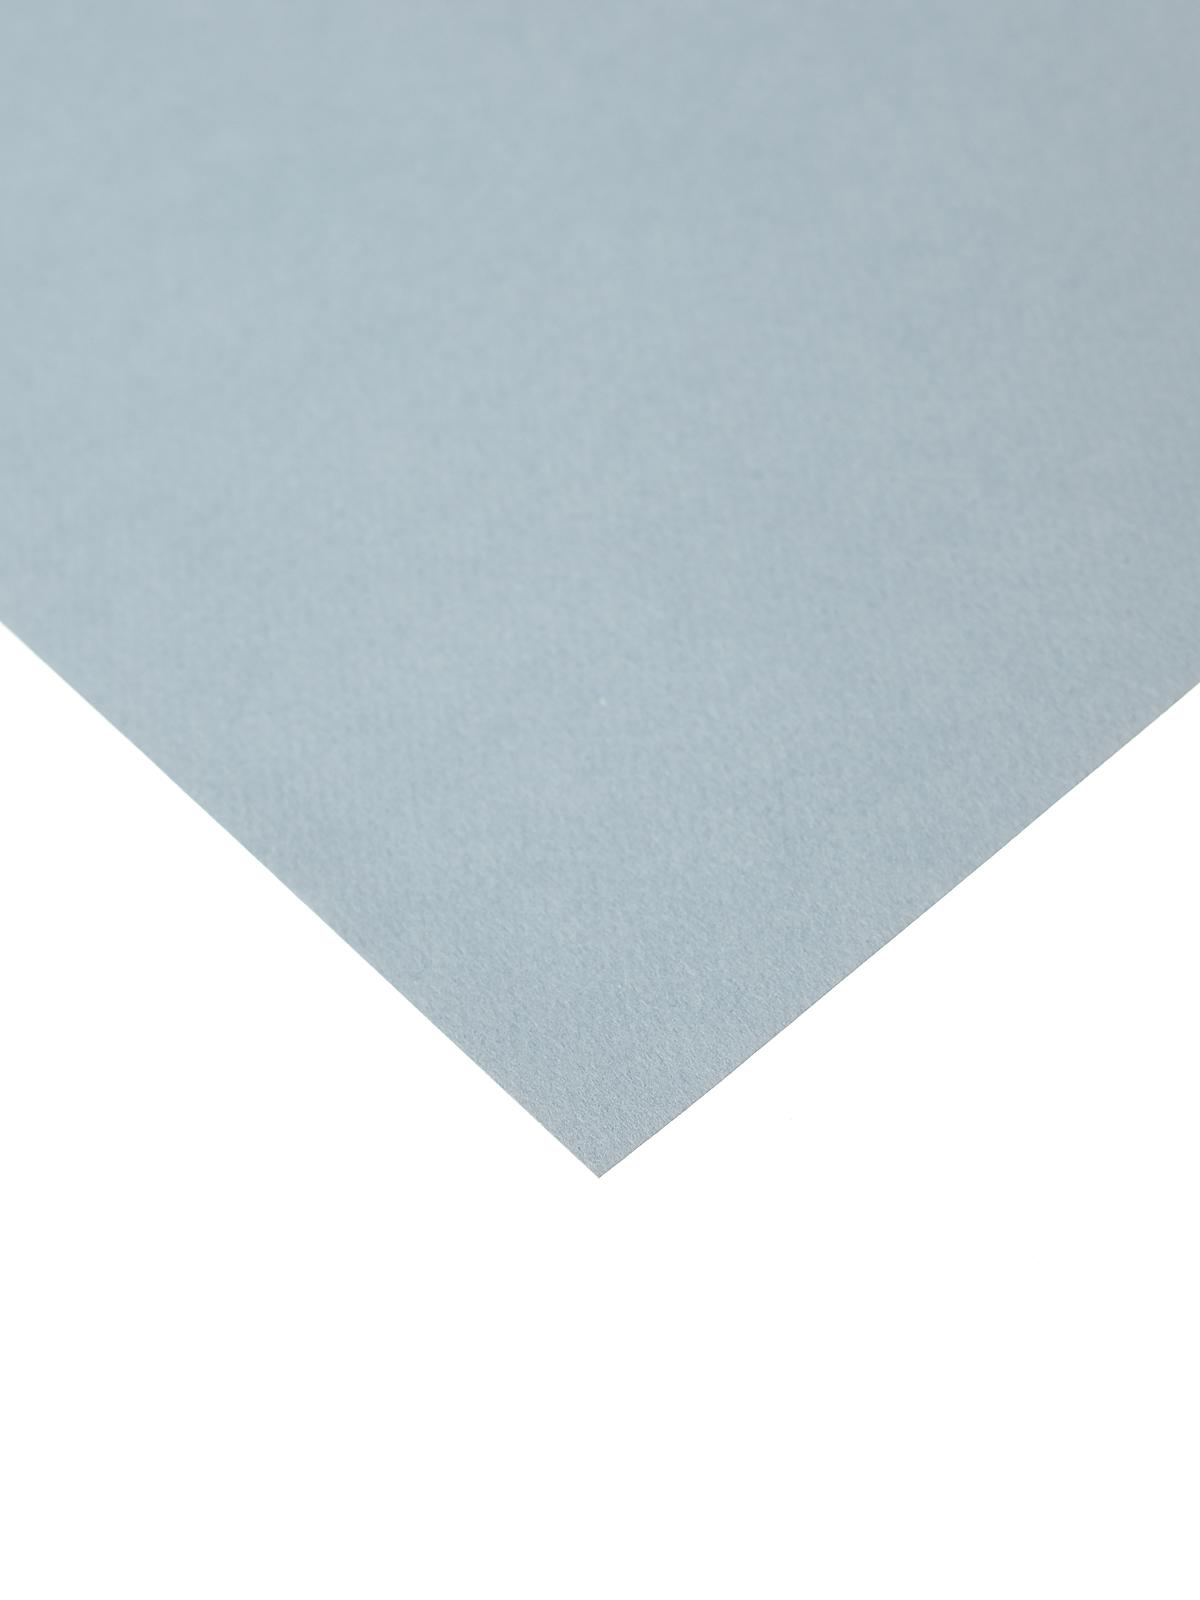 Mi-teintes Tinted Paper Light Blue 8.5 In. X 11 In.